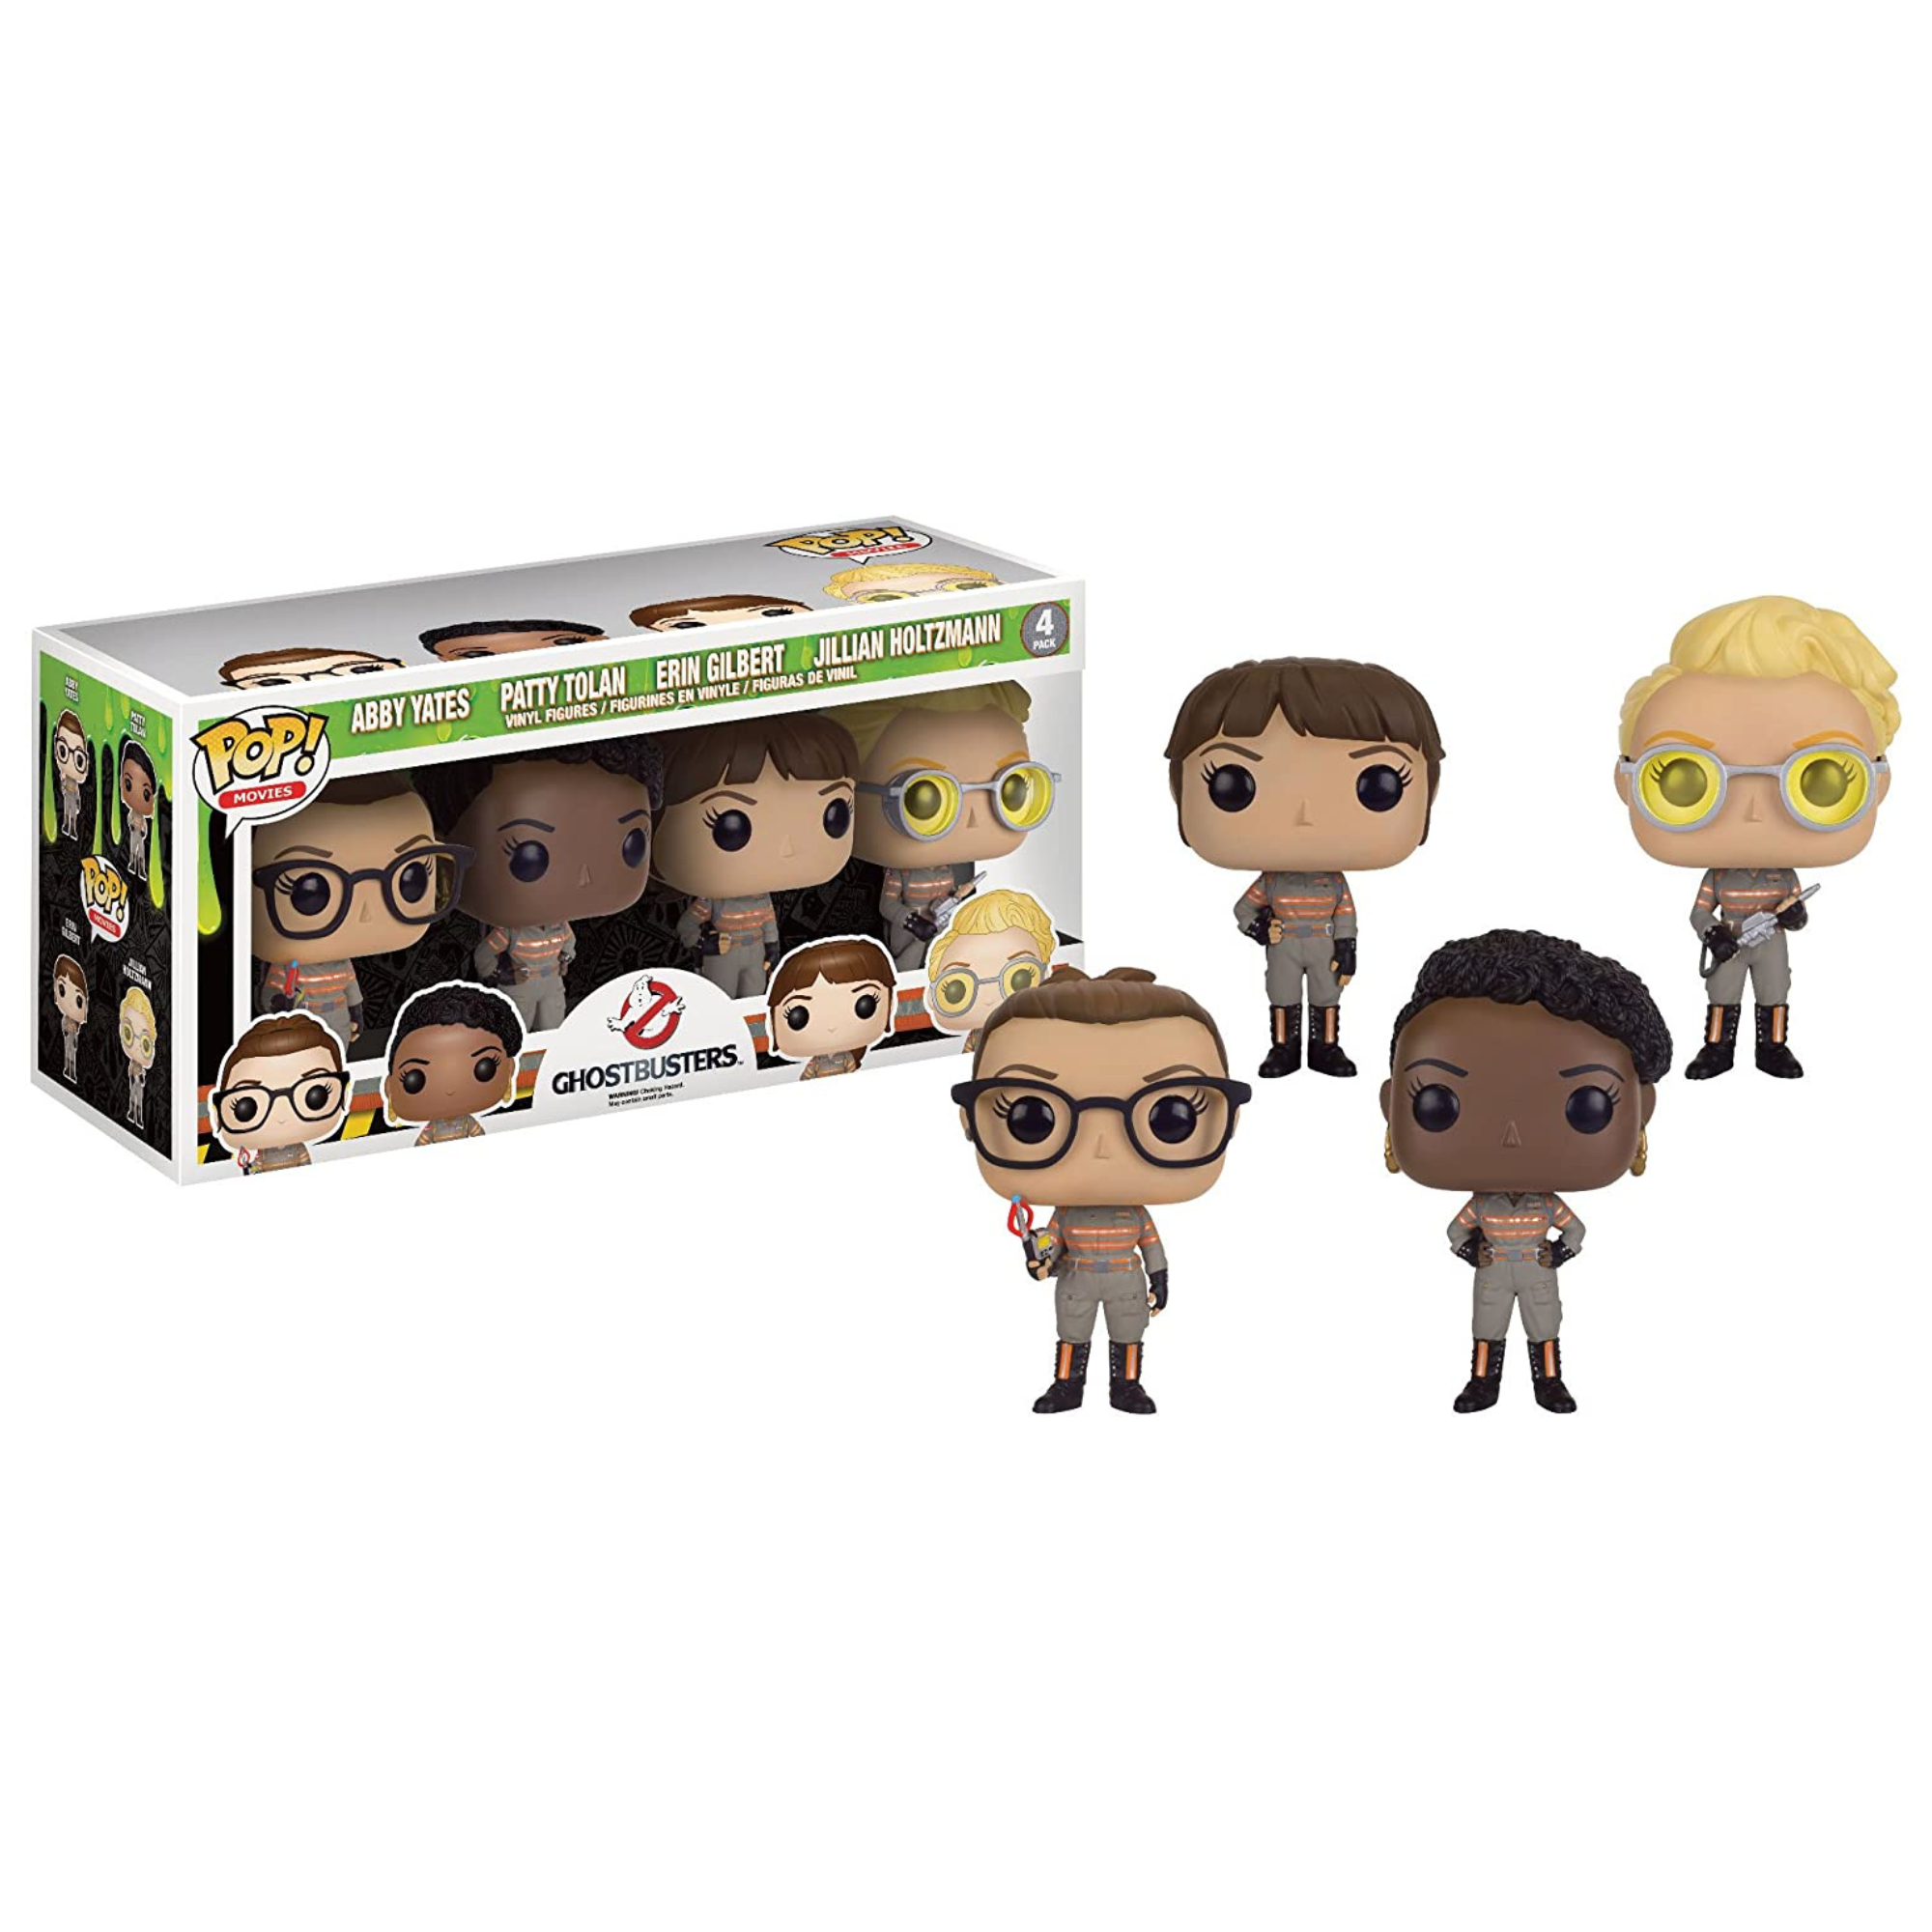 Funko POP! Movies: Ghostbusters Answer The Call Vinyl Figure Pack #4